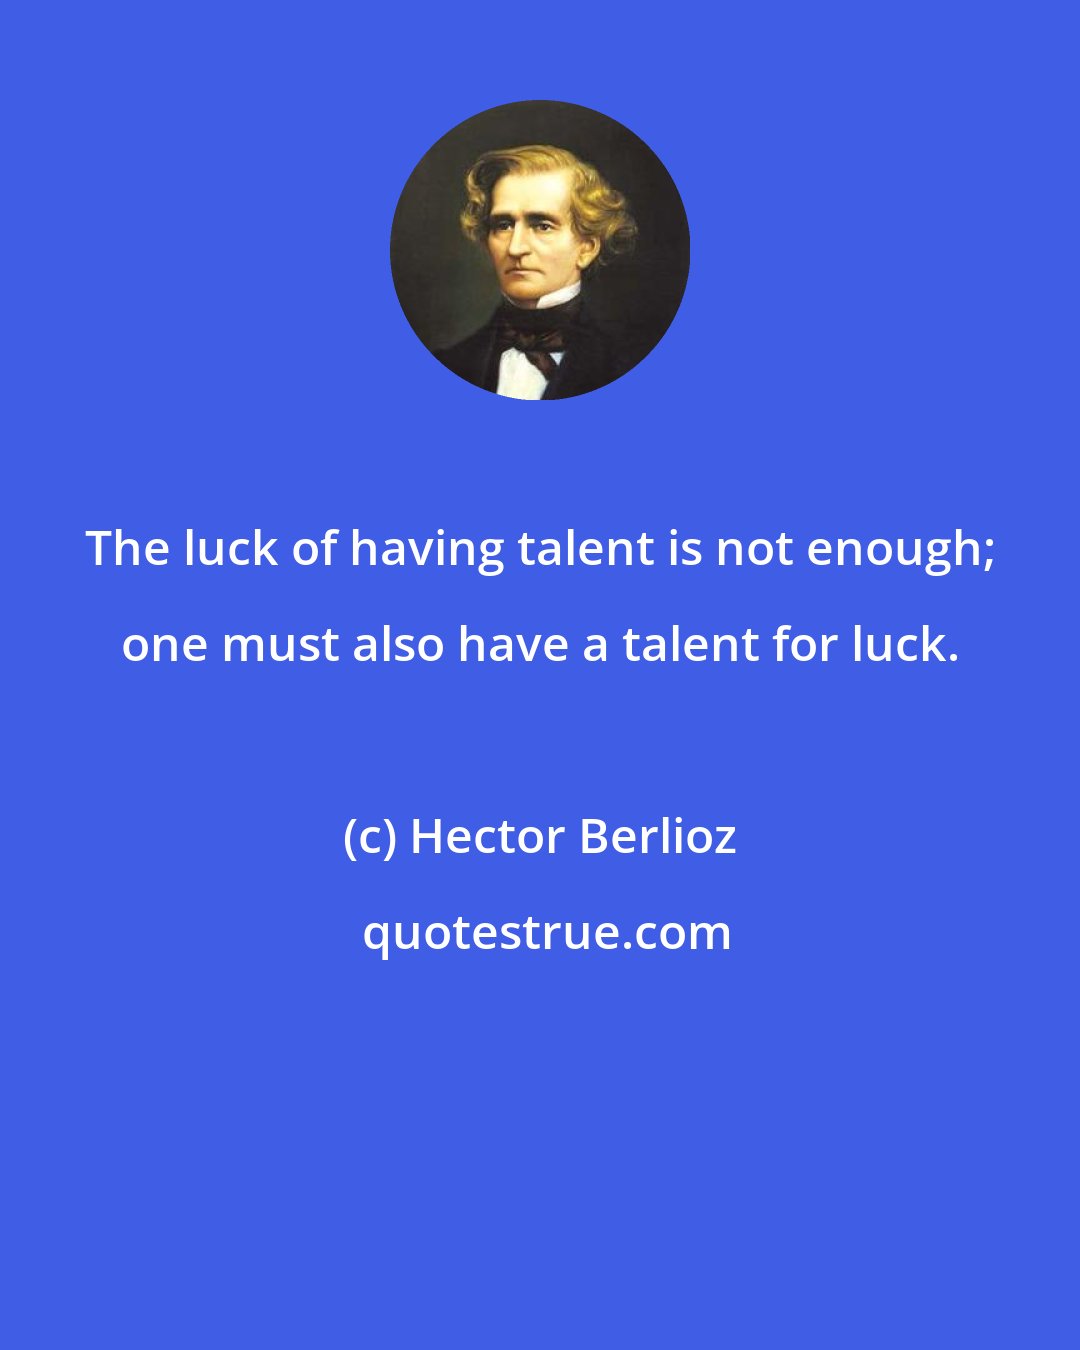 Hector Berlioz: The luck of having talent is not enough; one must also have a talent for luck.